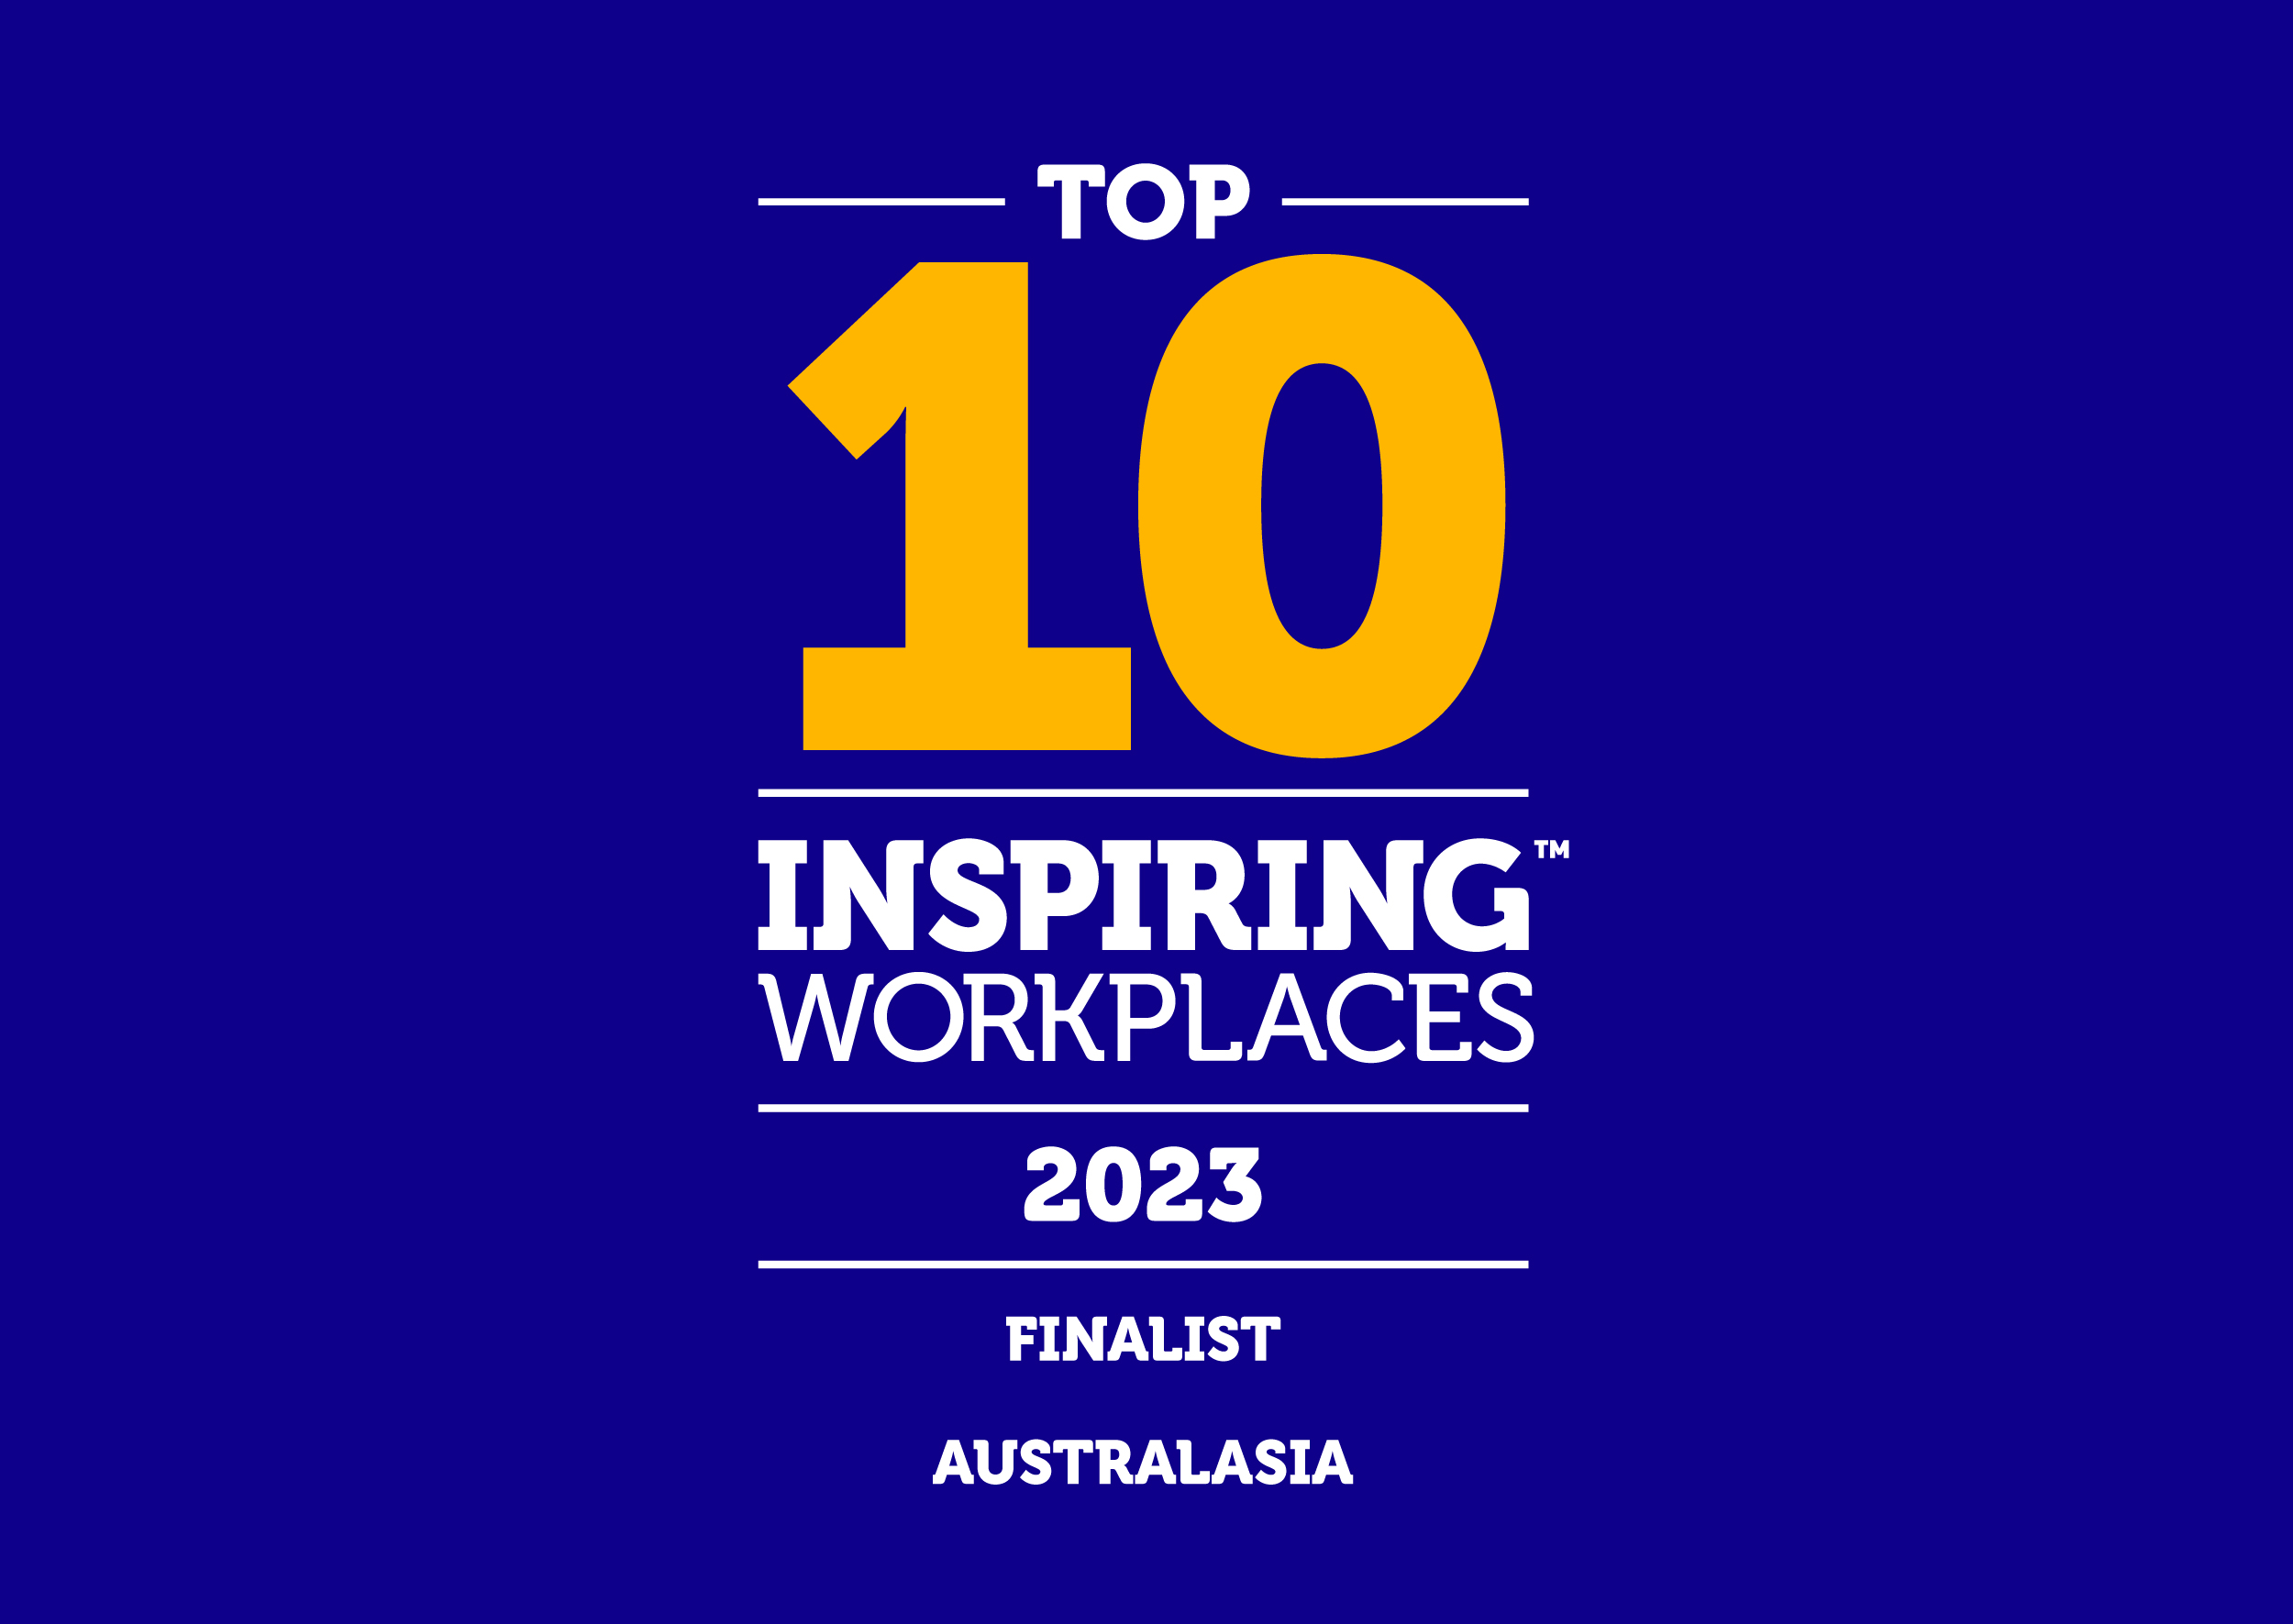 2023 Inspiring Workplaces Awards finalists for Australasia announced